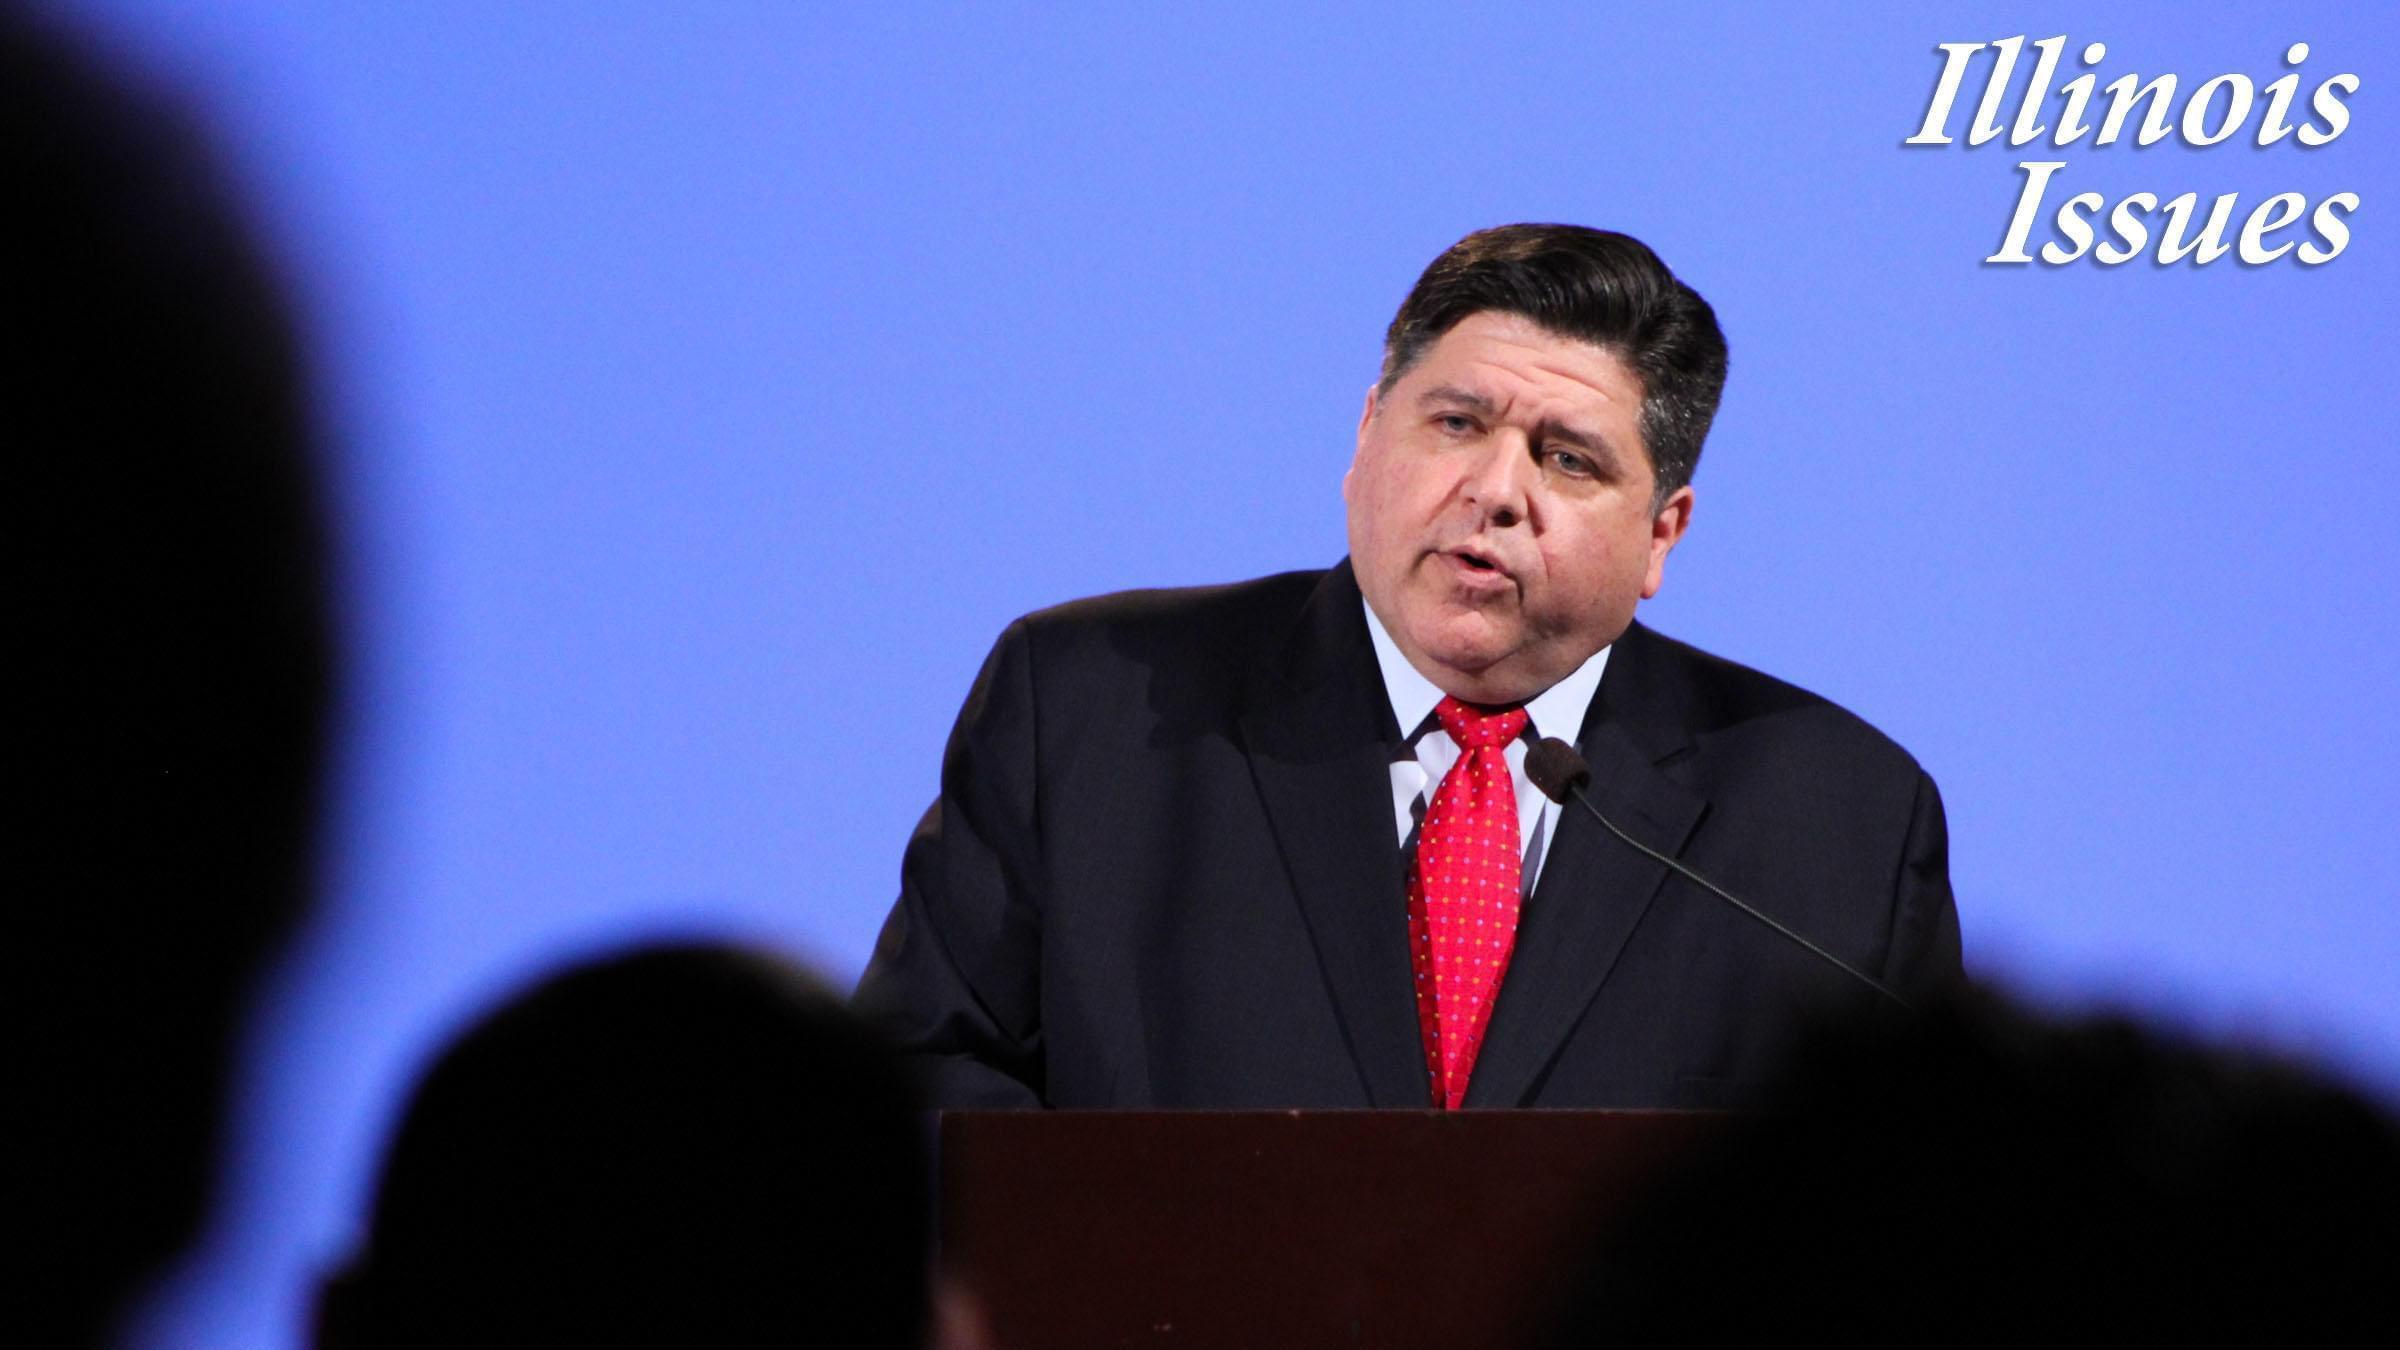 Gov. J.B. Pritzker speaks at a candidate forum in Peoria in this file photo from January 2018.